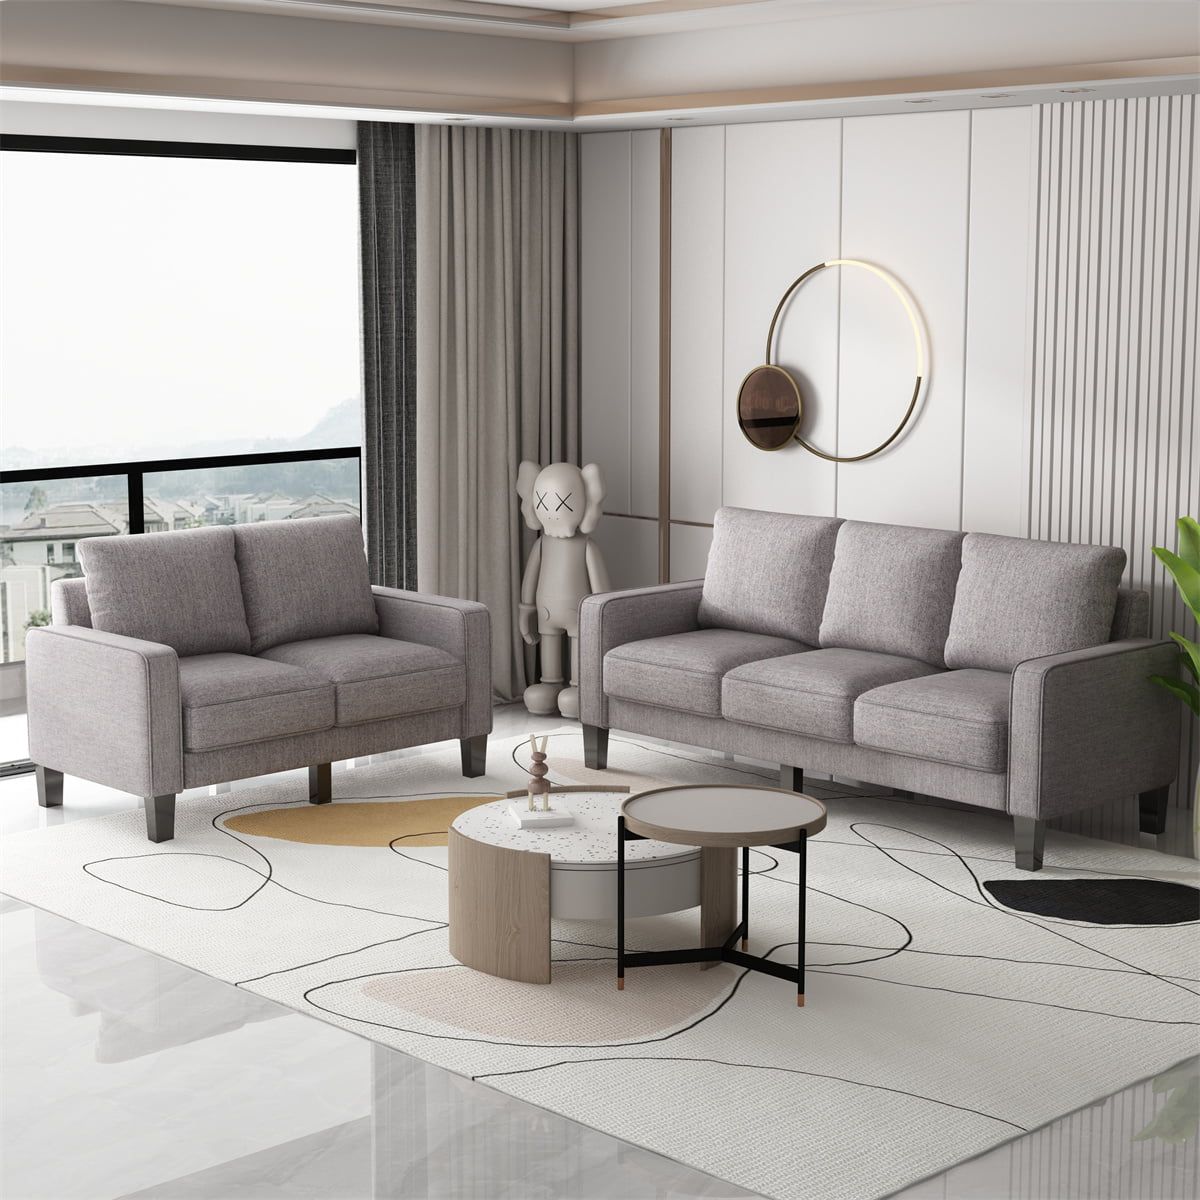 2 Pieces Living Room Sofa Set,Modern Linen Fabric Upholstered Couch  Furniture Sets Including 3 Seater Sofa Couch And Loveseat Sofa With Under  Seat Storage For Living Room Apartment Office,Light Grey – Walmart Inside Modern Linen Fabric Sofa Sets (View 11 of 15)